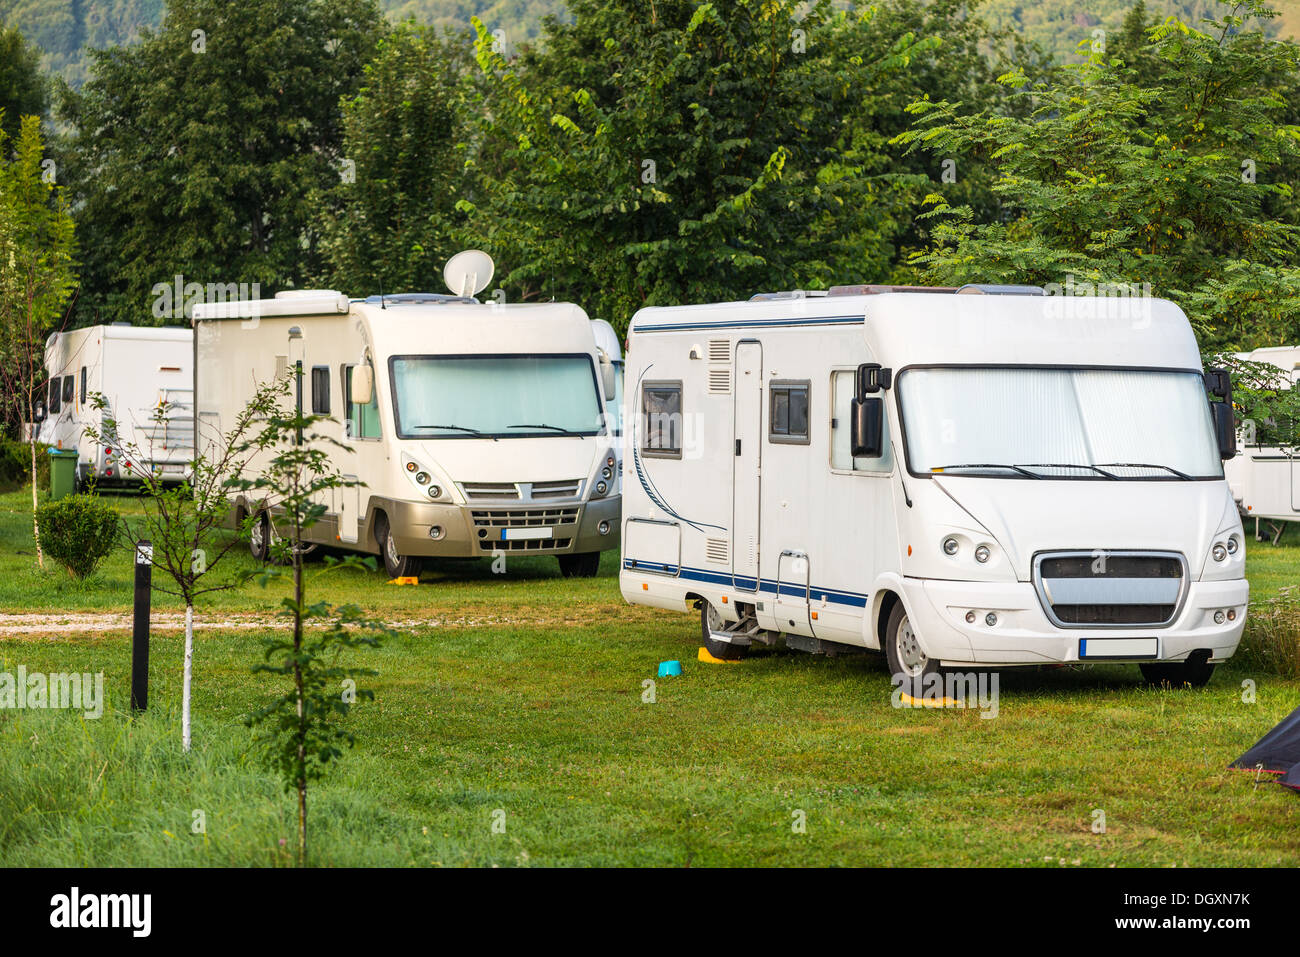 Mobile Home; Camping; Vehicle Trailer; Car; Tent; Summer; Holiday; Vacations; Park; Travel Destinations; Field; Travel; Grass; Stock Photo